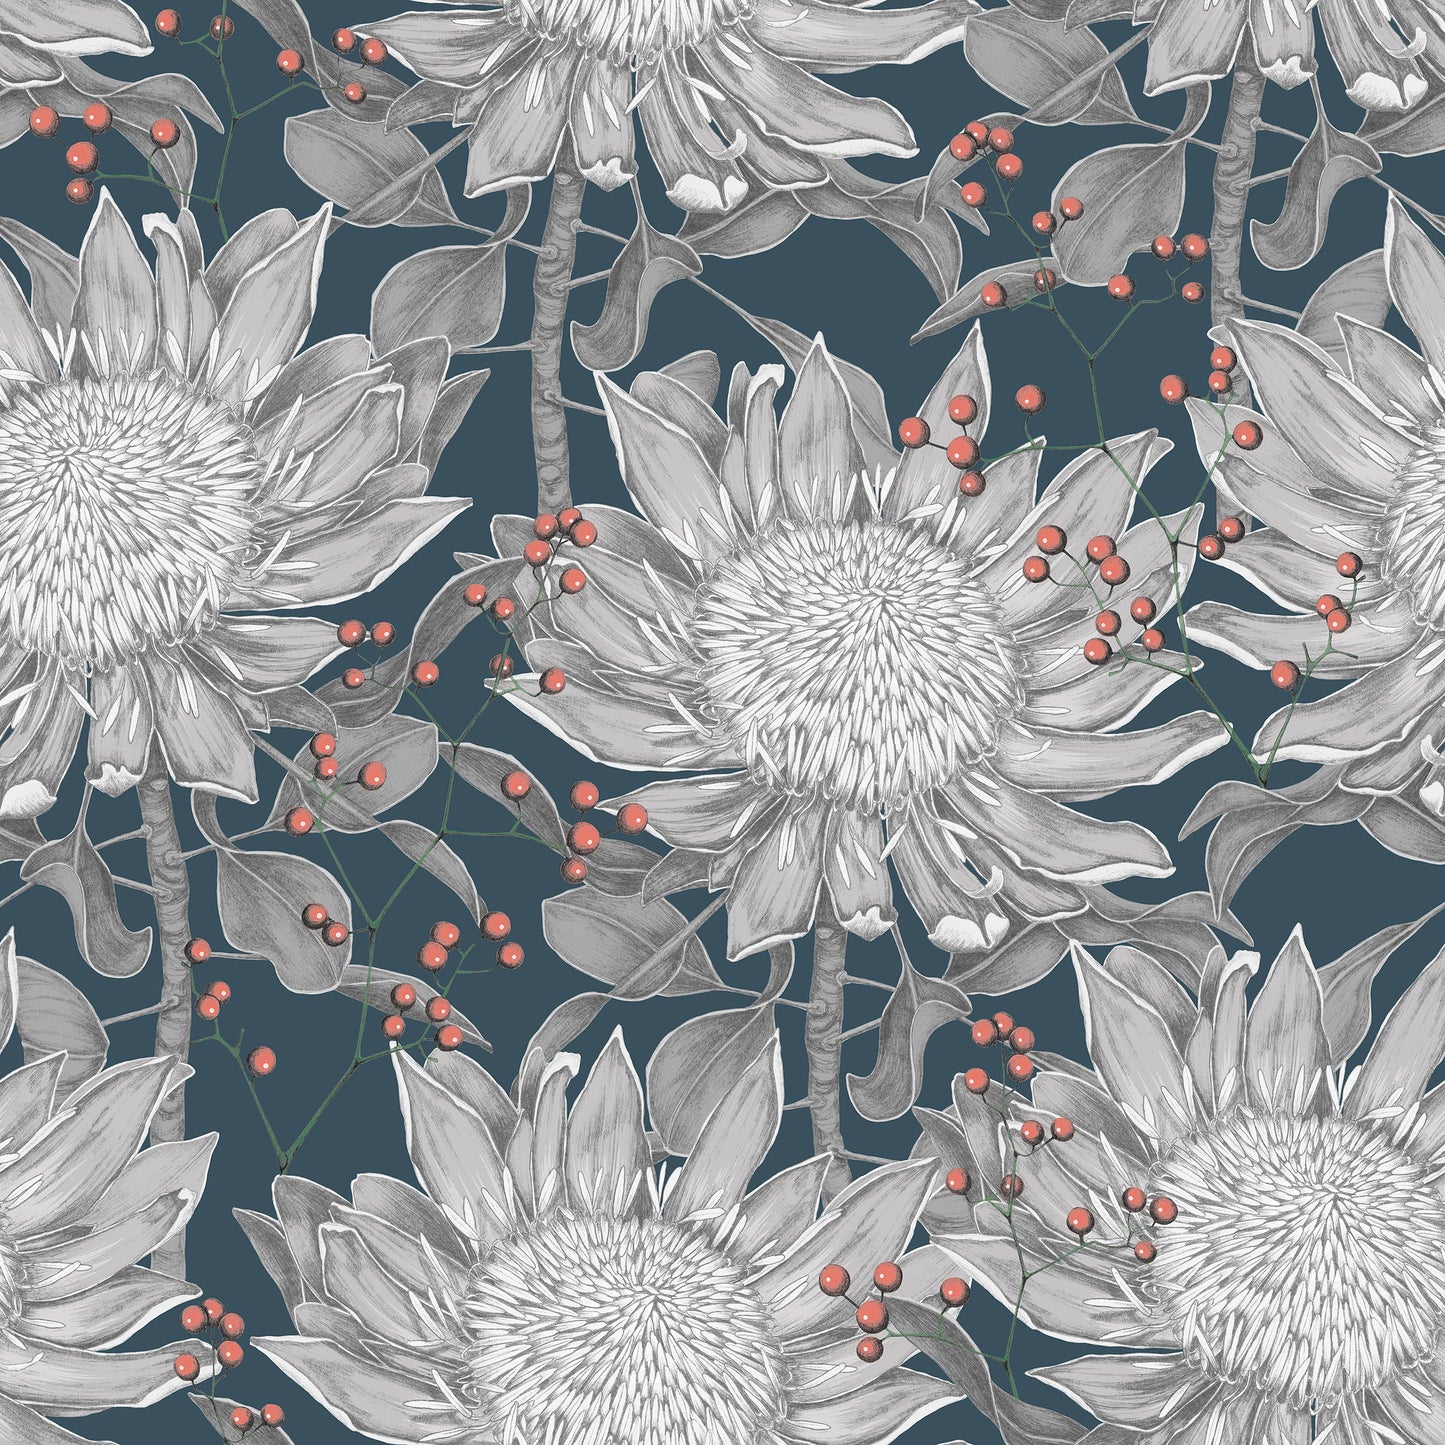 Whimsical grey/gray sunflower pattern wild berry design on blue background easy to install and remove peel and stick custom wallpaper available in different lengths/sizes locally created and printed in Canada wallpaper. Washable, durable, commercial grade, removable and waterproof.